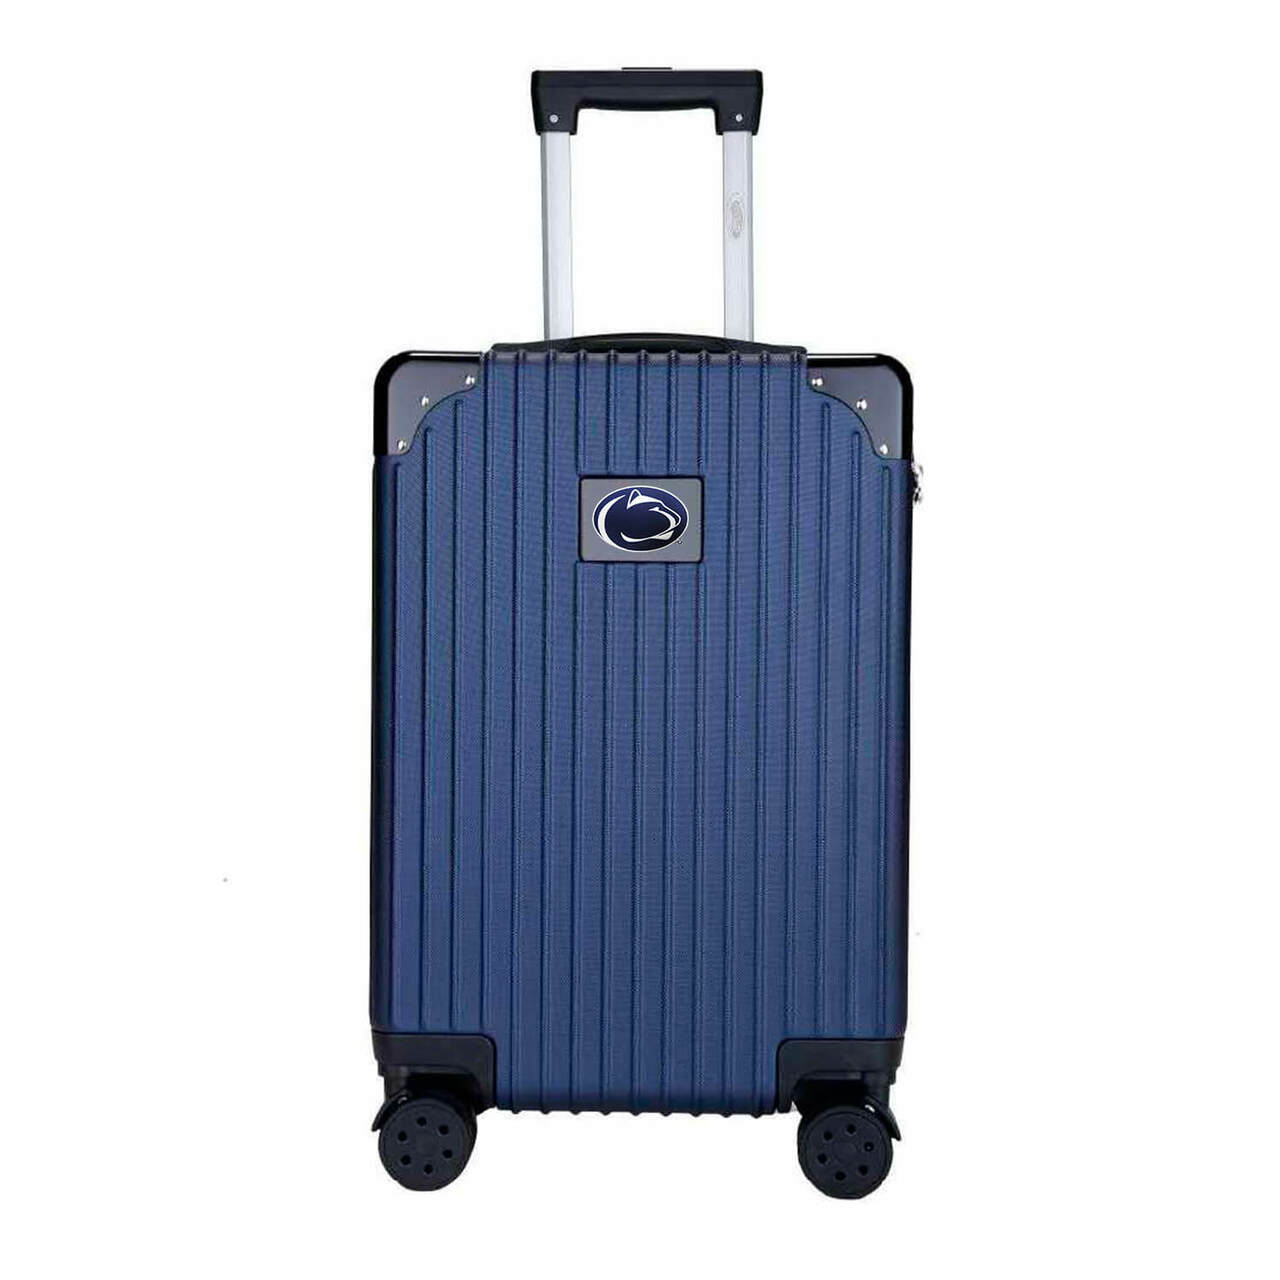 Penn State Nittany Lions Premium 2-Toned 21" Carry-On Hardcase in NAVY